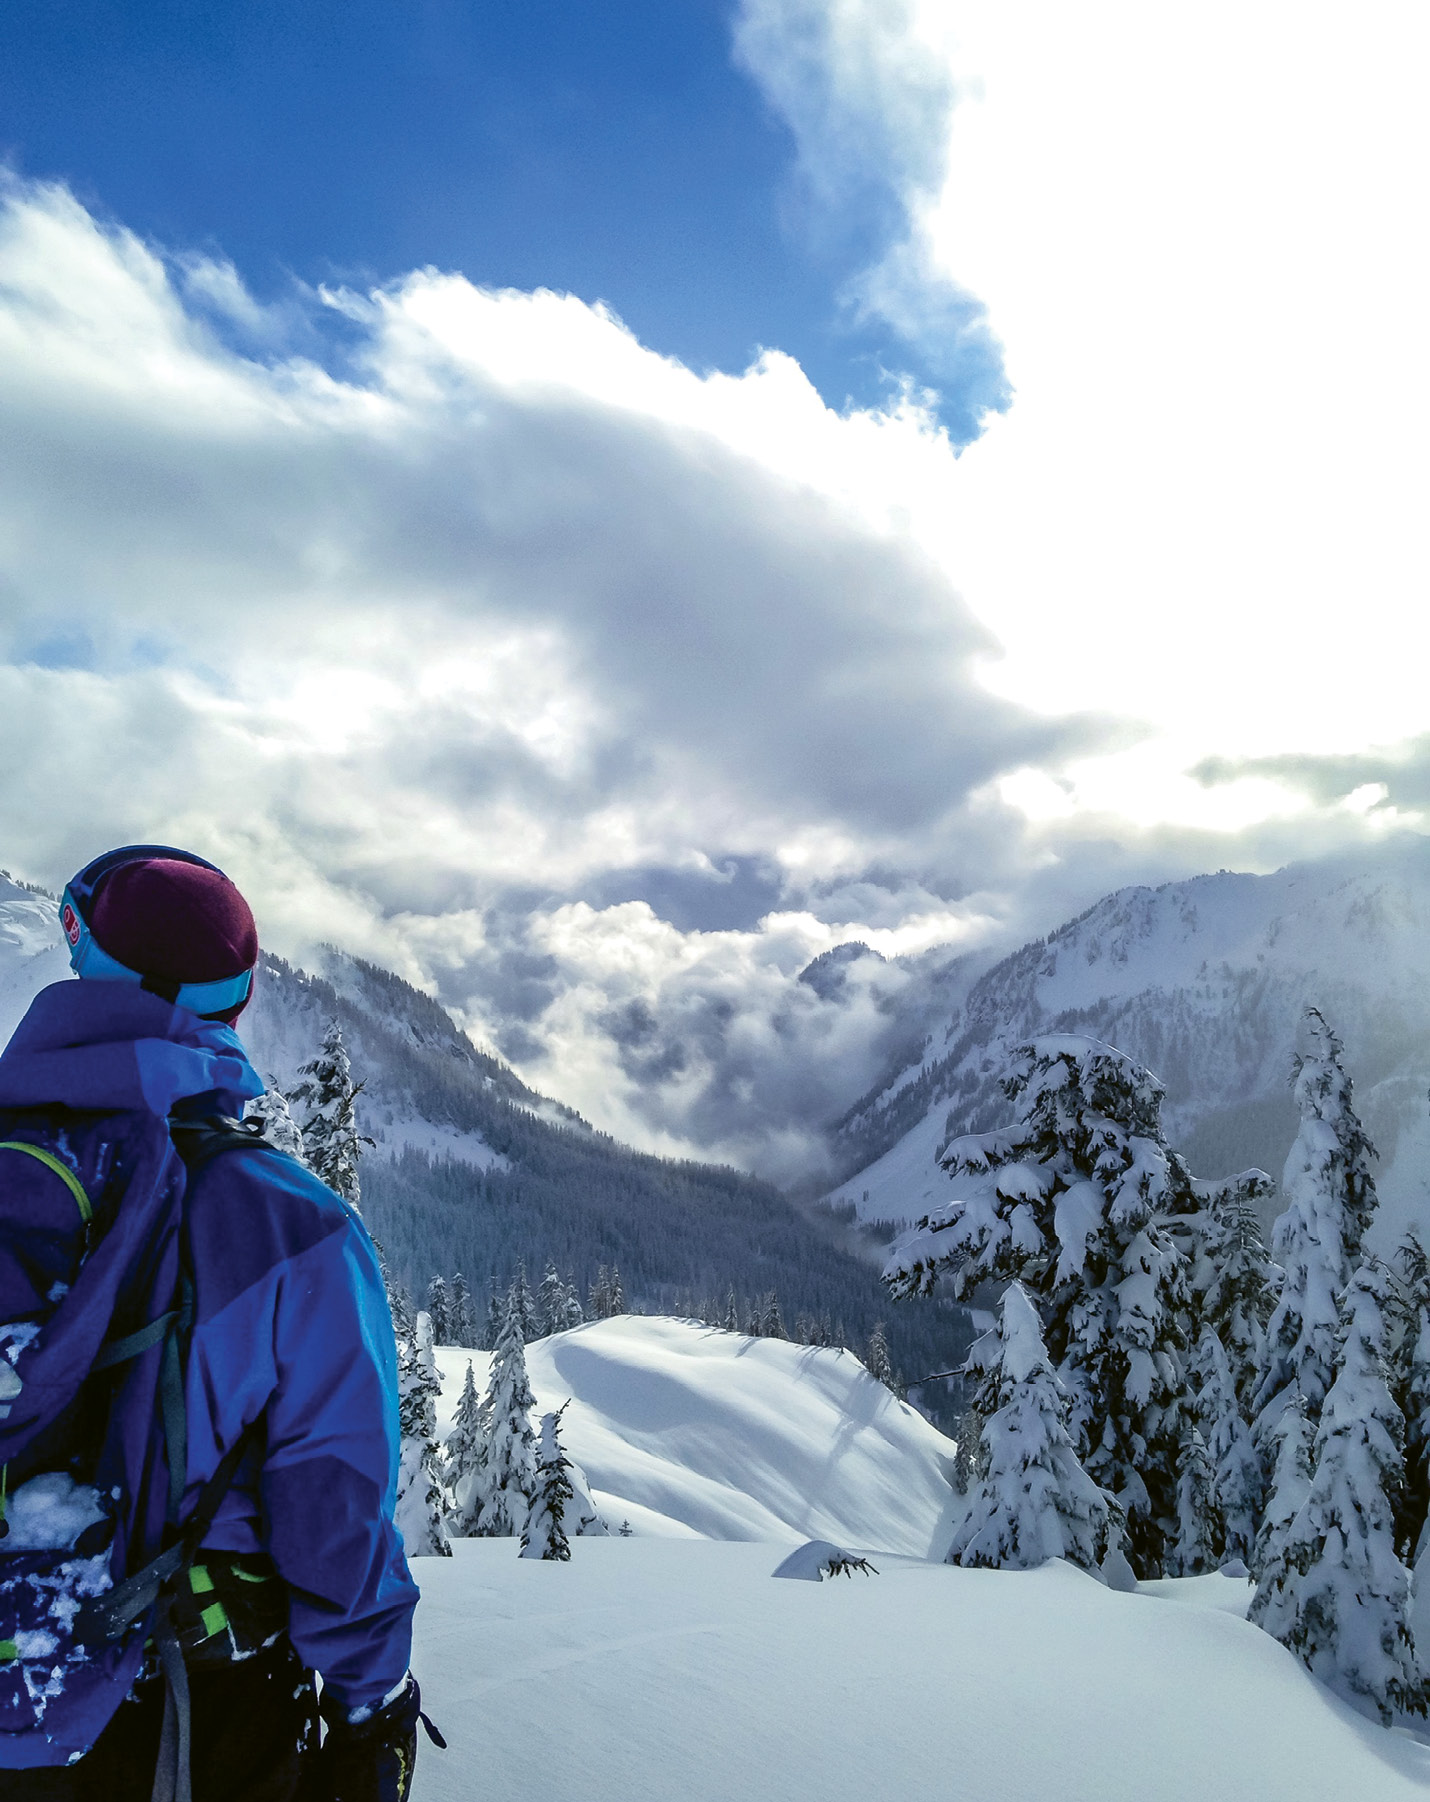 Powder Stash: Mount Baker is a true locals’ ski mountain, but they’ll make you feel welcome if you’re willing to trek through the rainforest from Bellingham to these legendary steep slopes with famously soft snow.